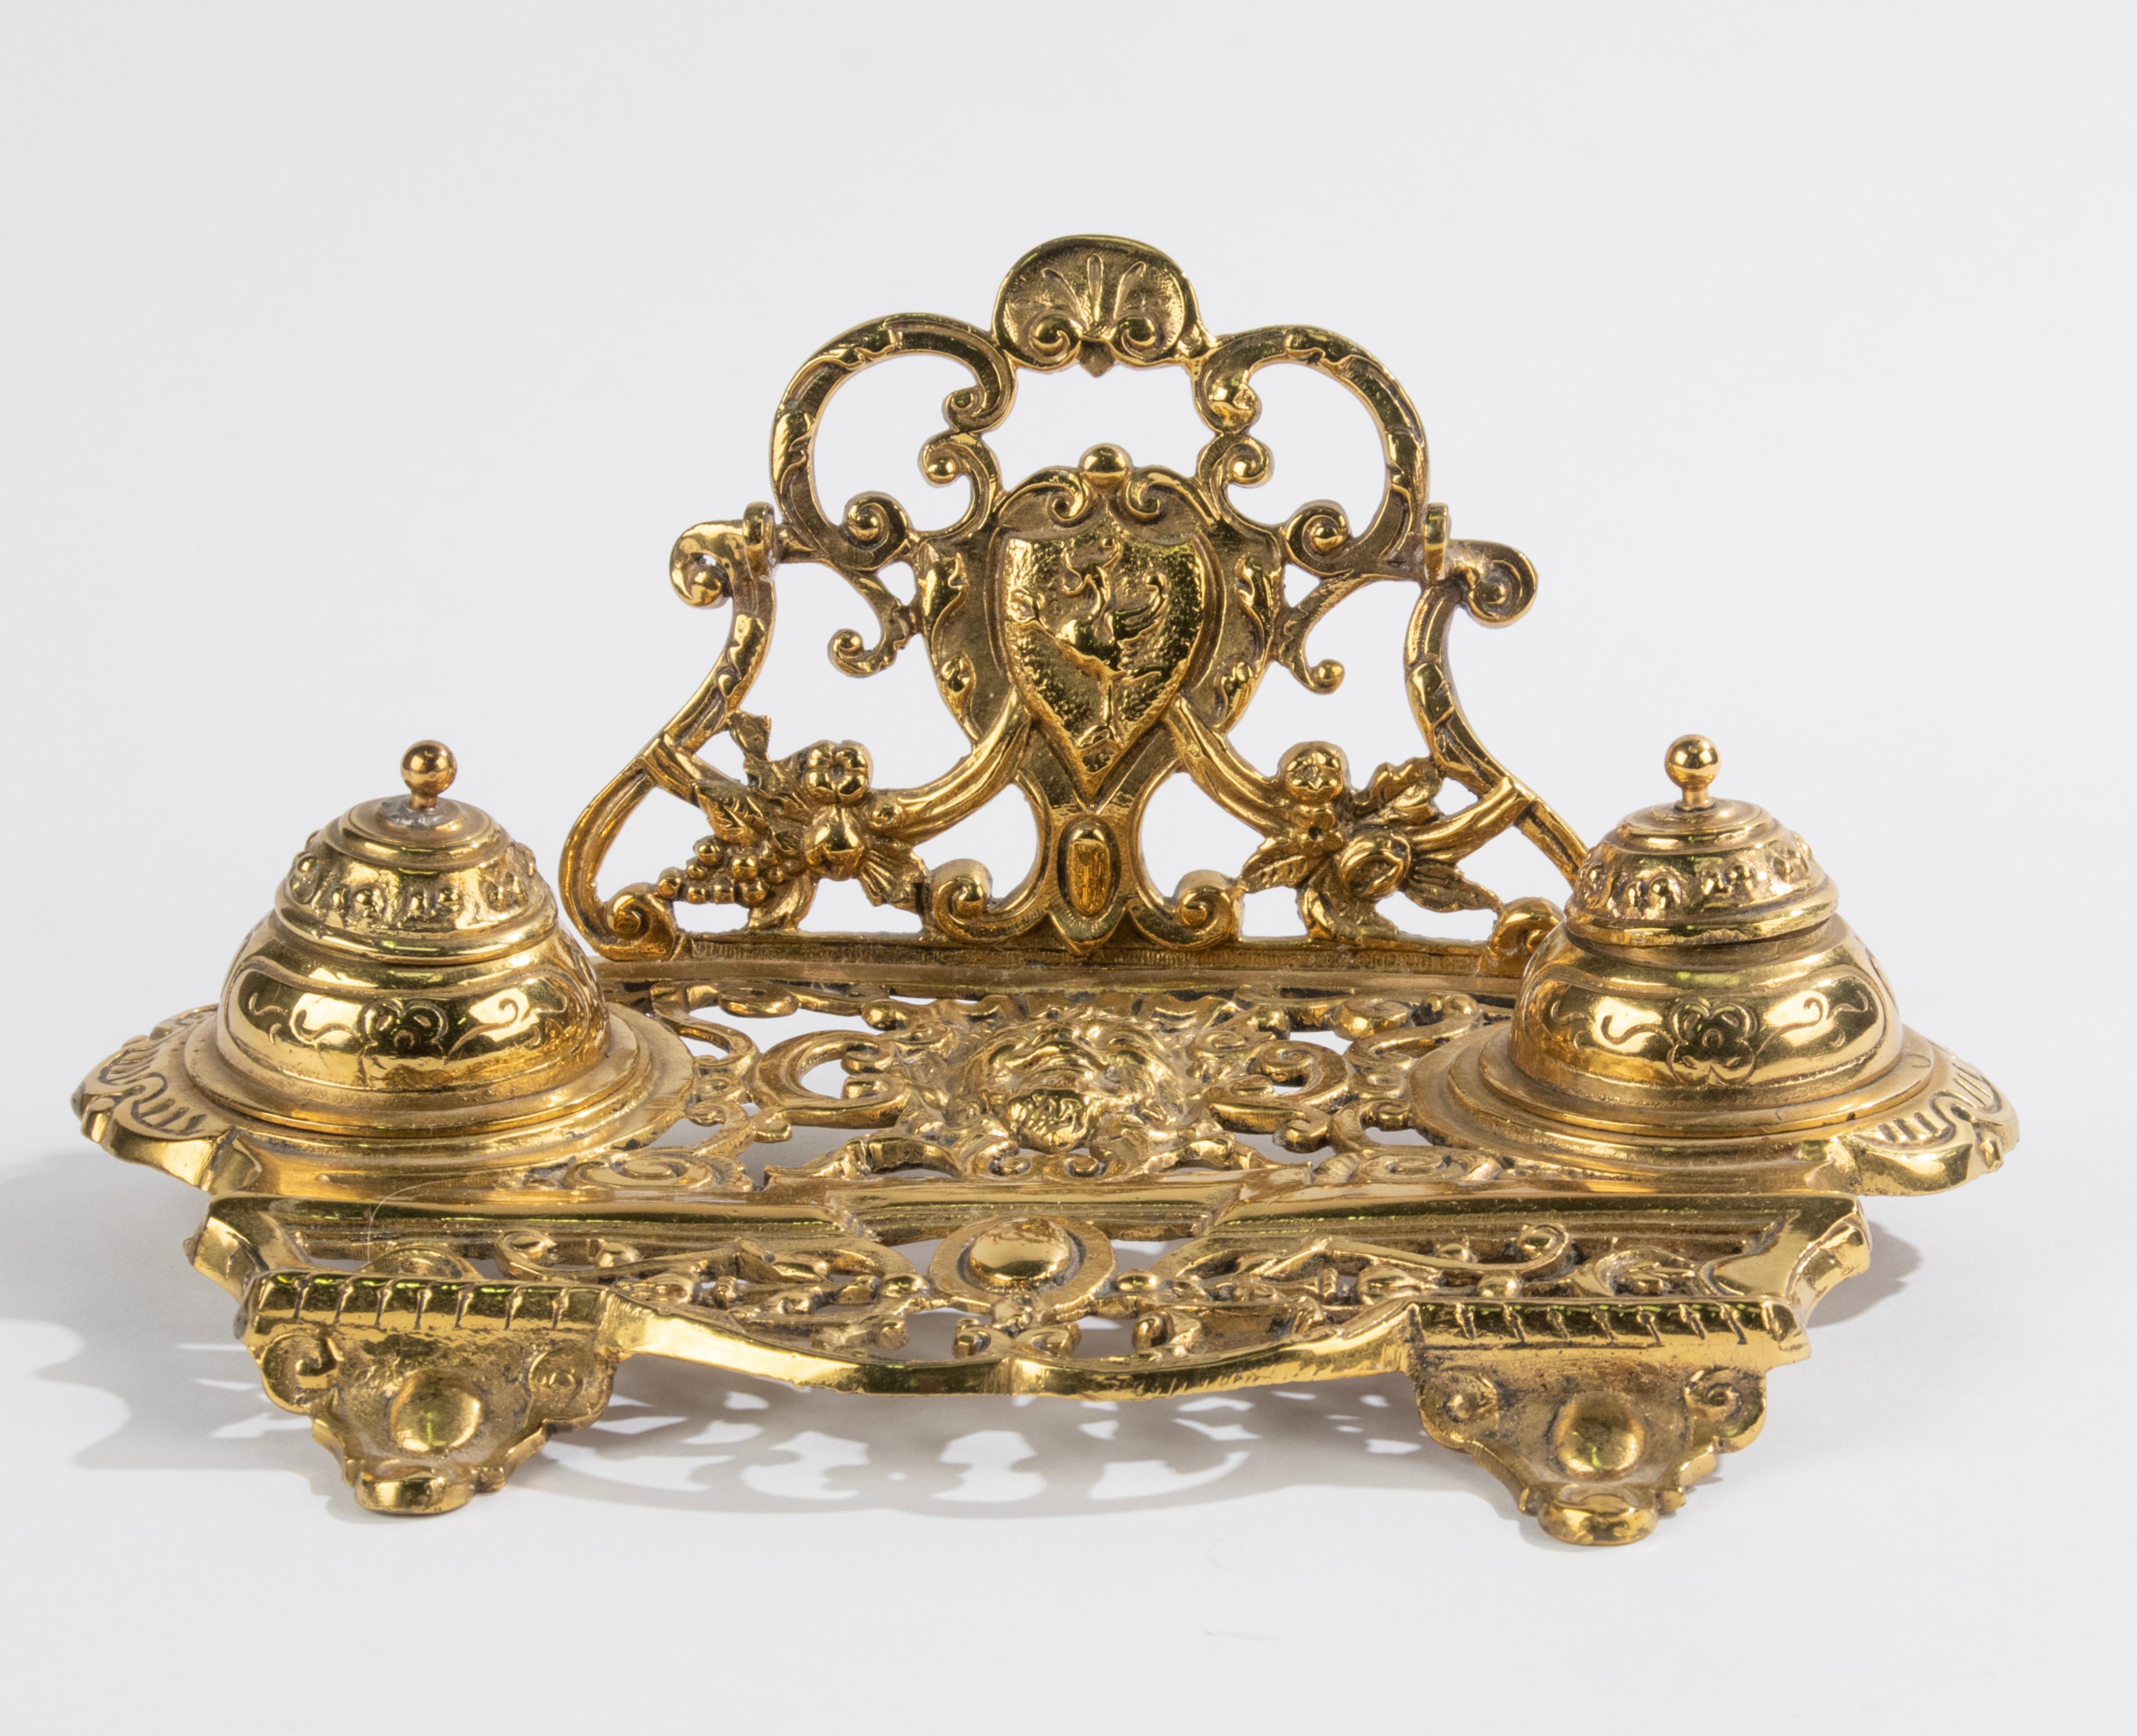 An antique ink stand, made of polished brass, completely in Renaissance style, with richly pieced scroll motifs. The inkwell has two removable ink wells. The upright support has a penholder. Made in France, 1900-1910
Dimensions: 12 (h) x 26 x 18